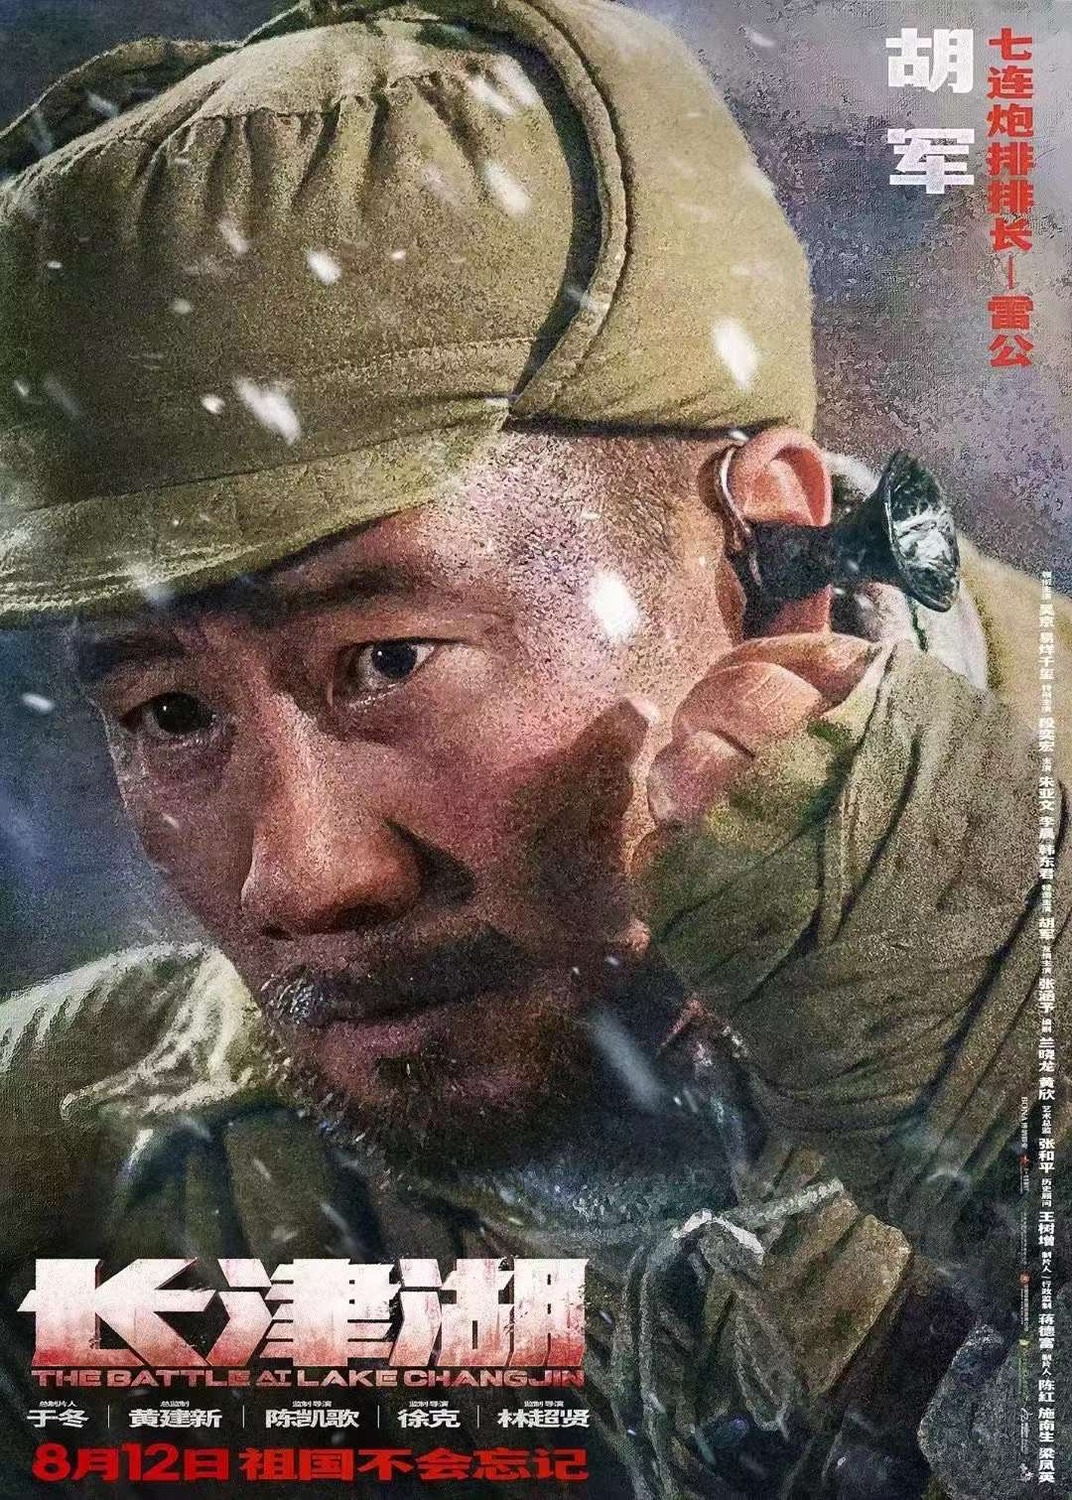 Extra Large Movie Poster Image for The Battle at Lake Changjin (#9 of 24)